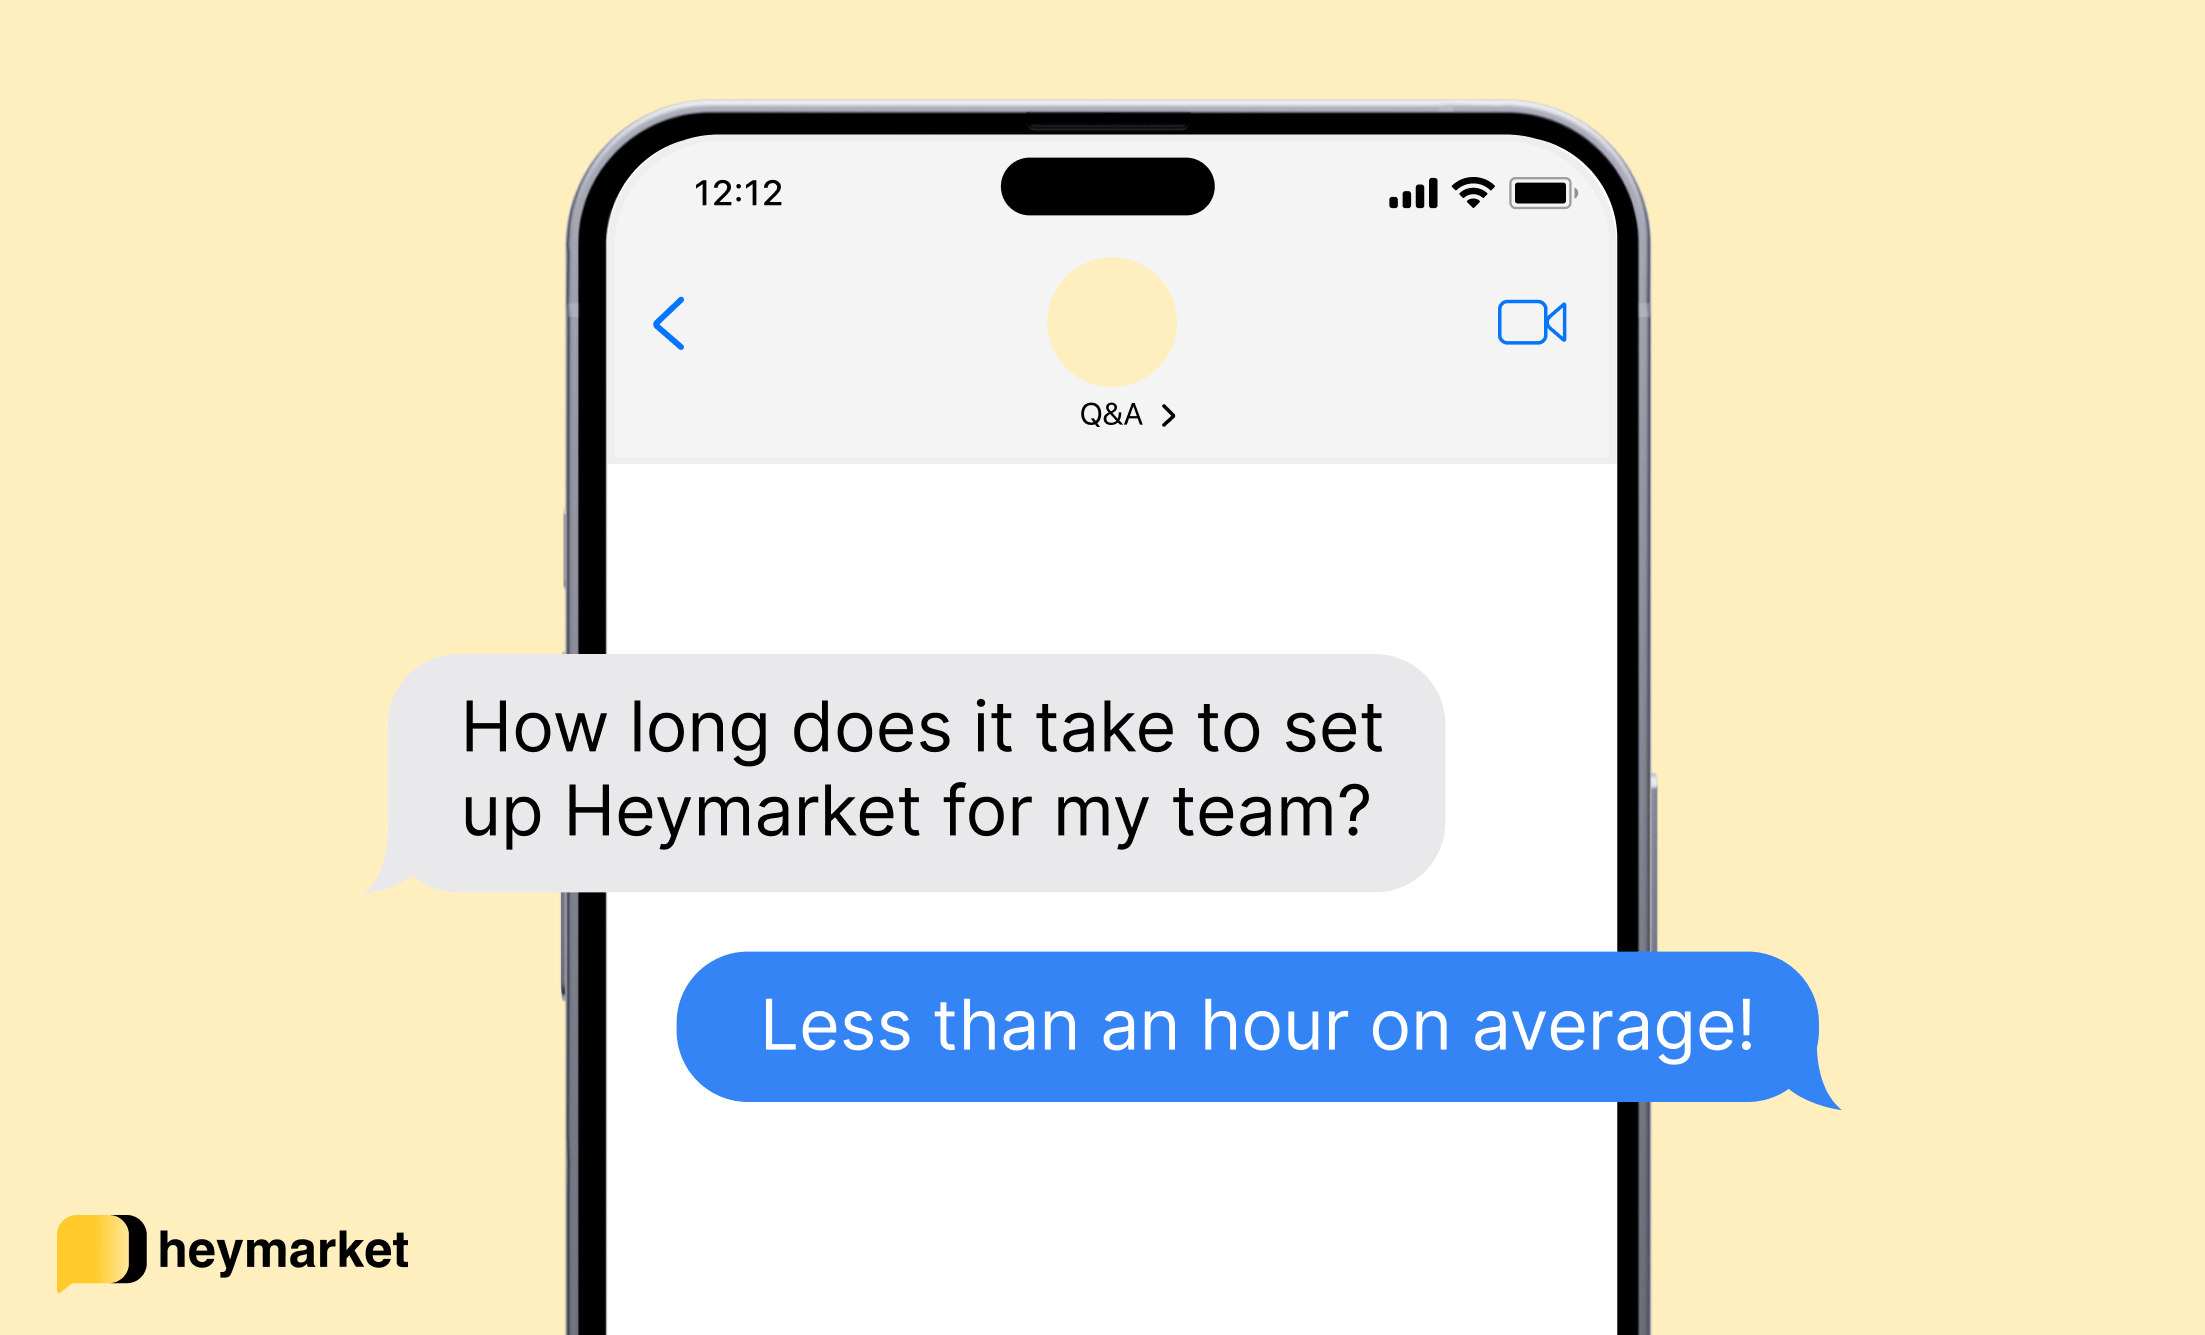 Text message template used in a client presentation: Q: How long does it take to set up Heymarket for my team? A: Less than an hour on average!